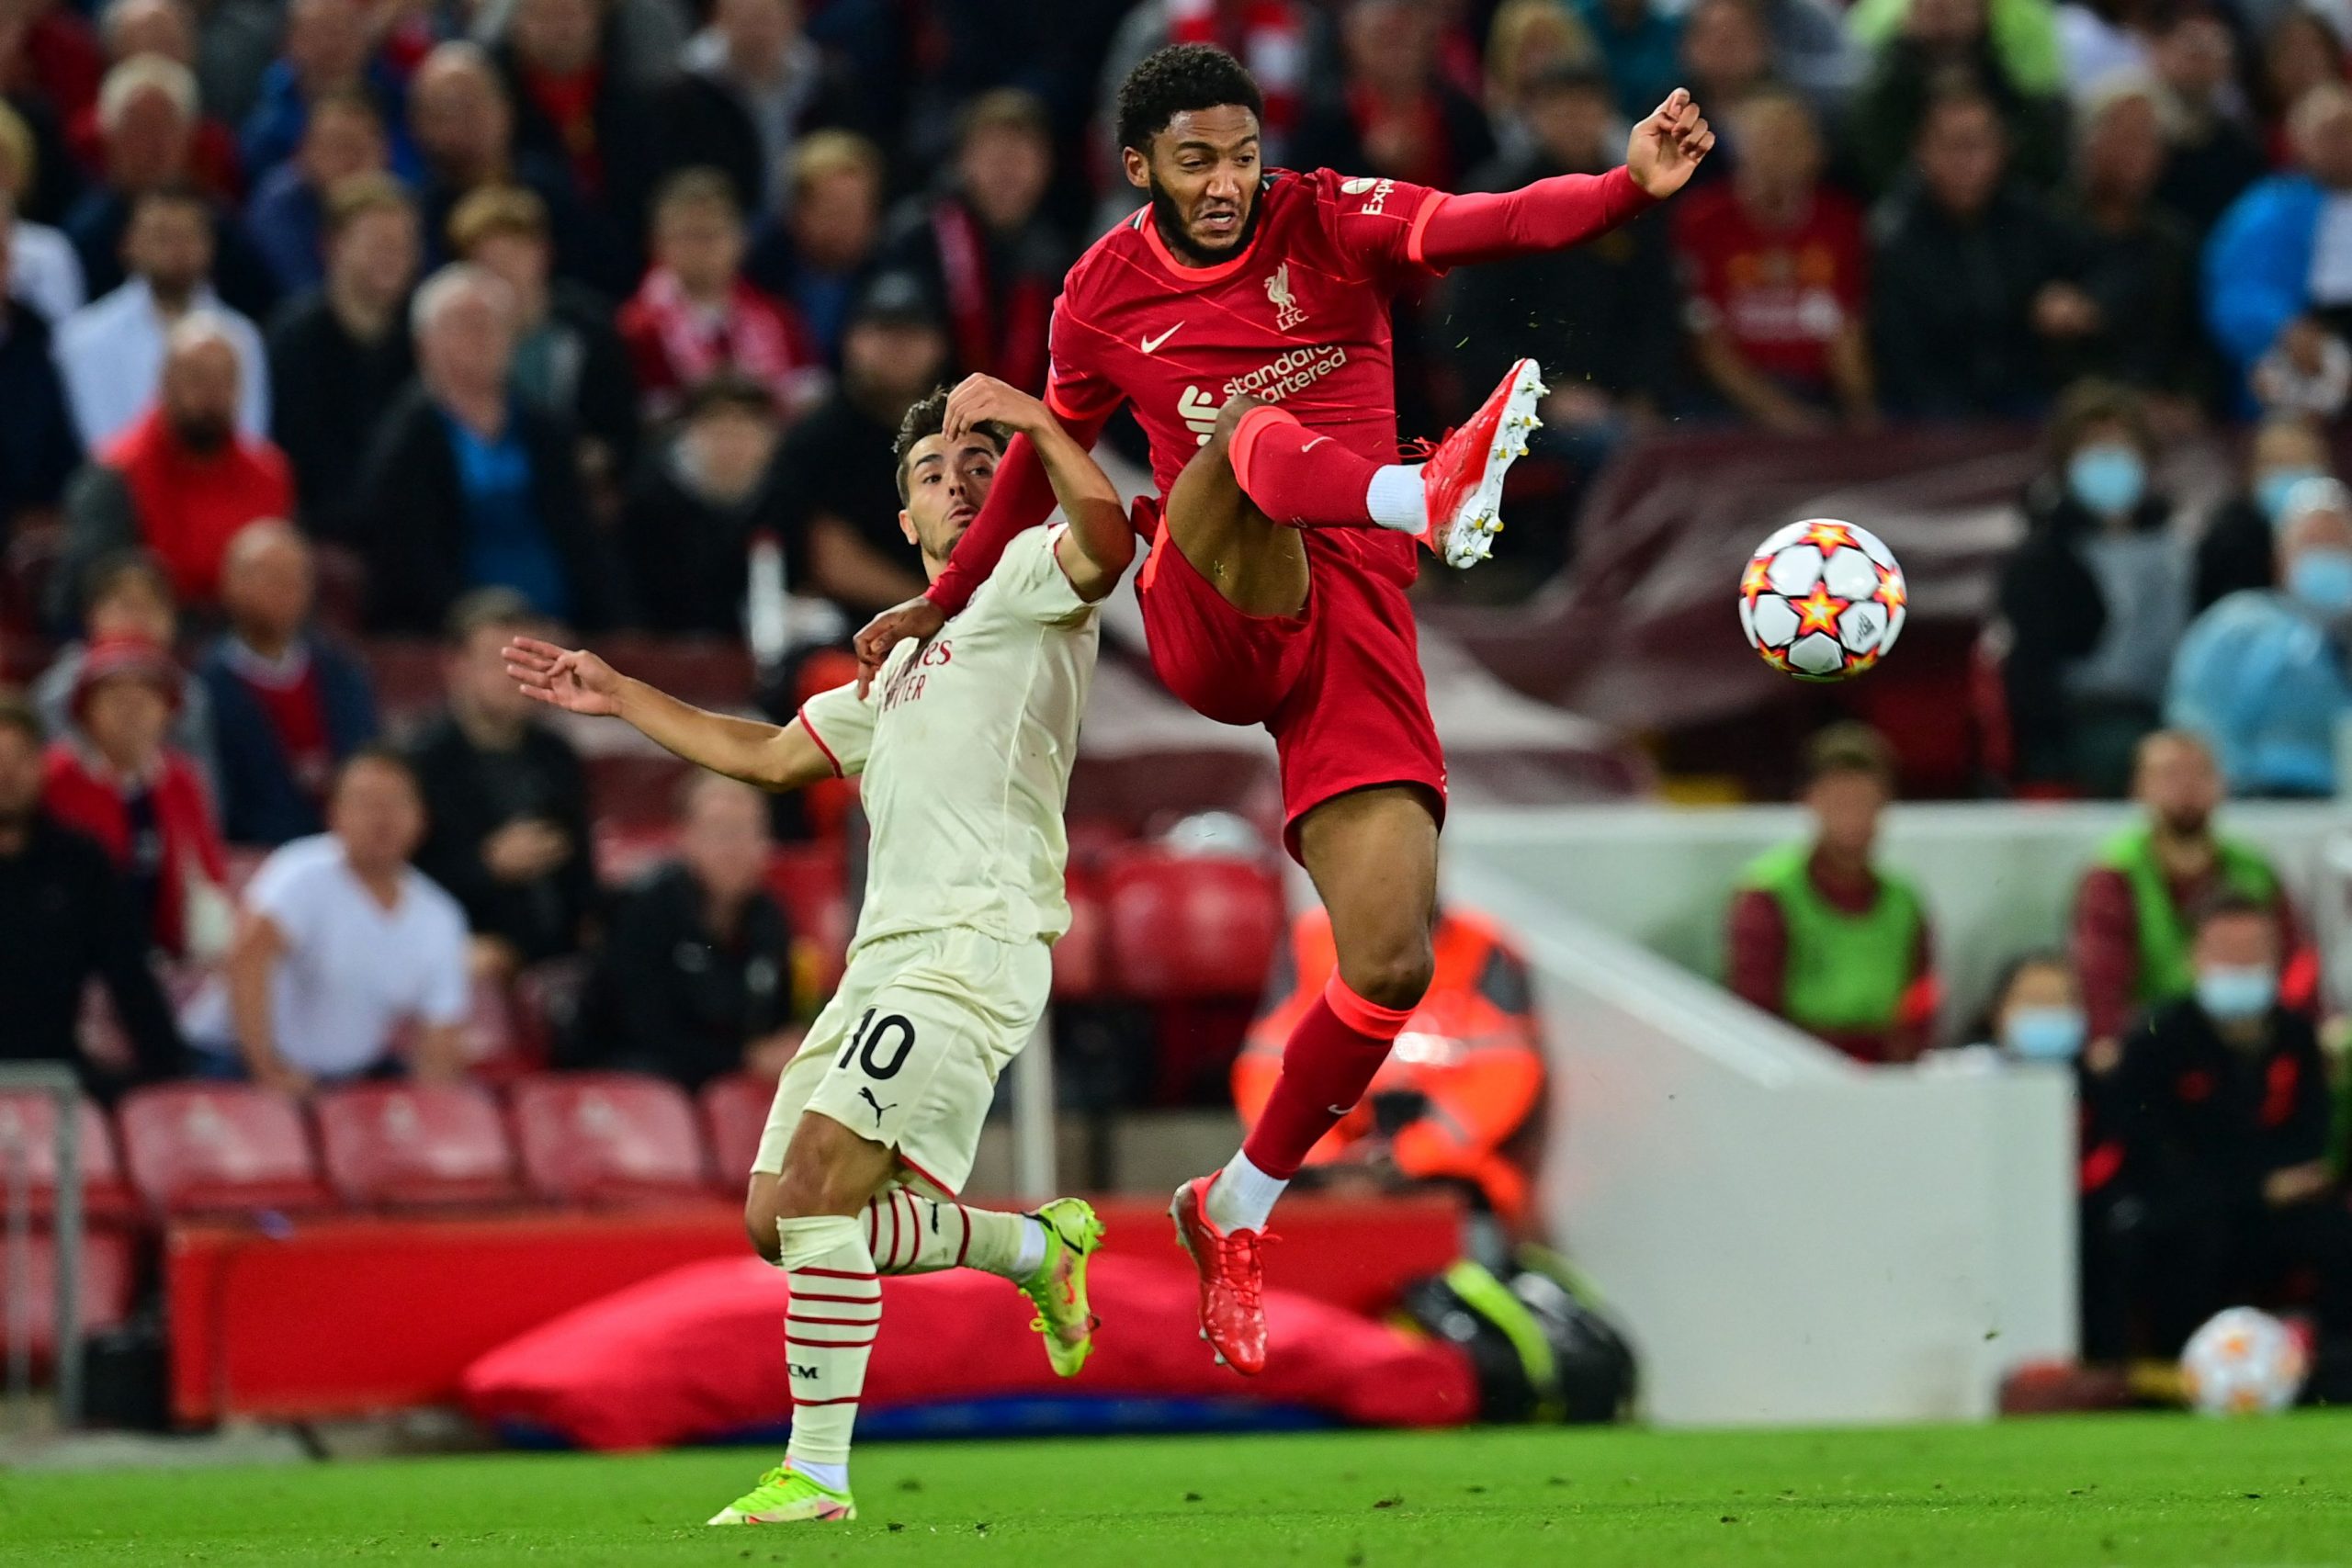 Tottenham Hotspur handed Joe Gomez transfer boost as Liverpool line up a replacement.